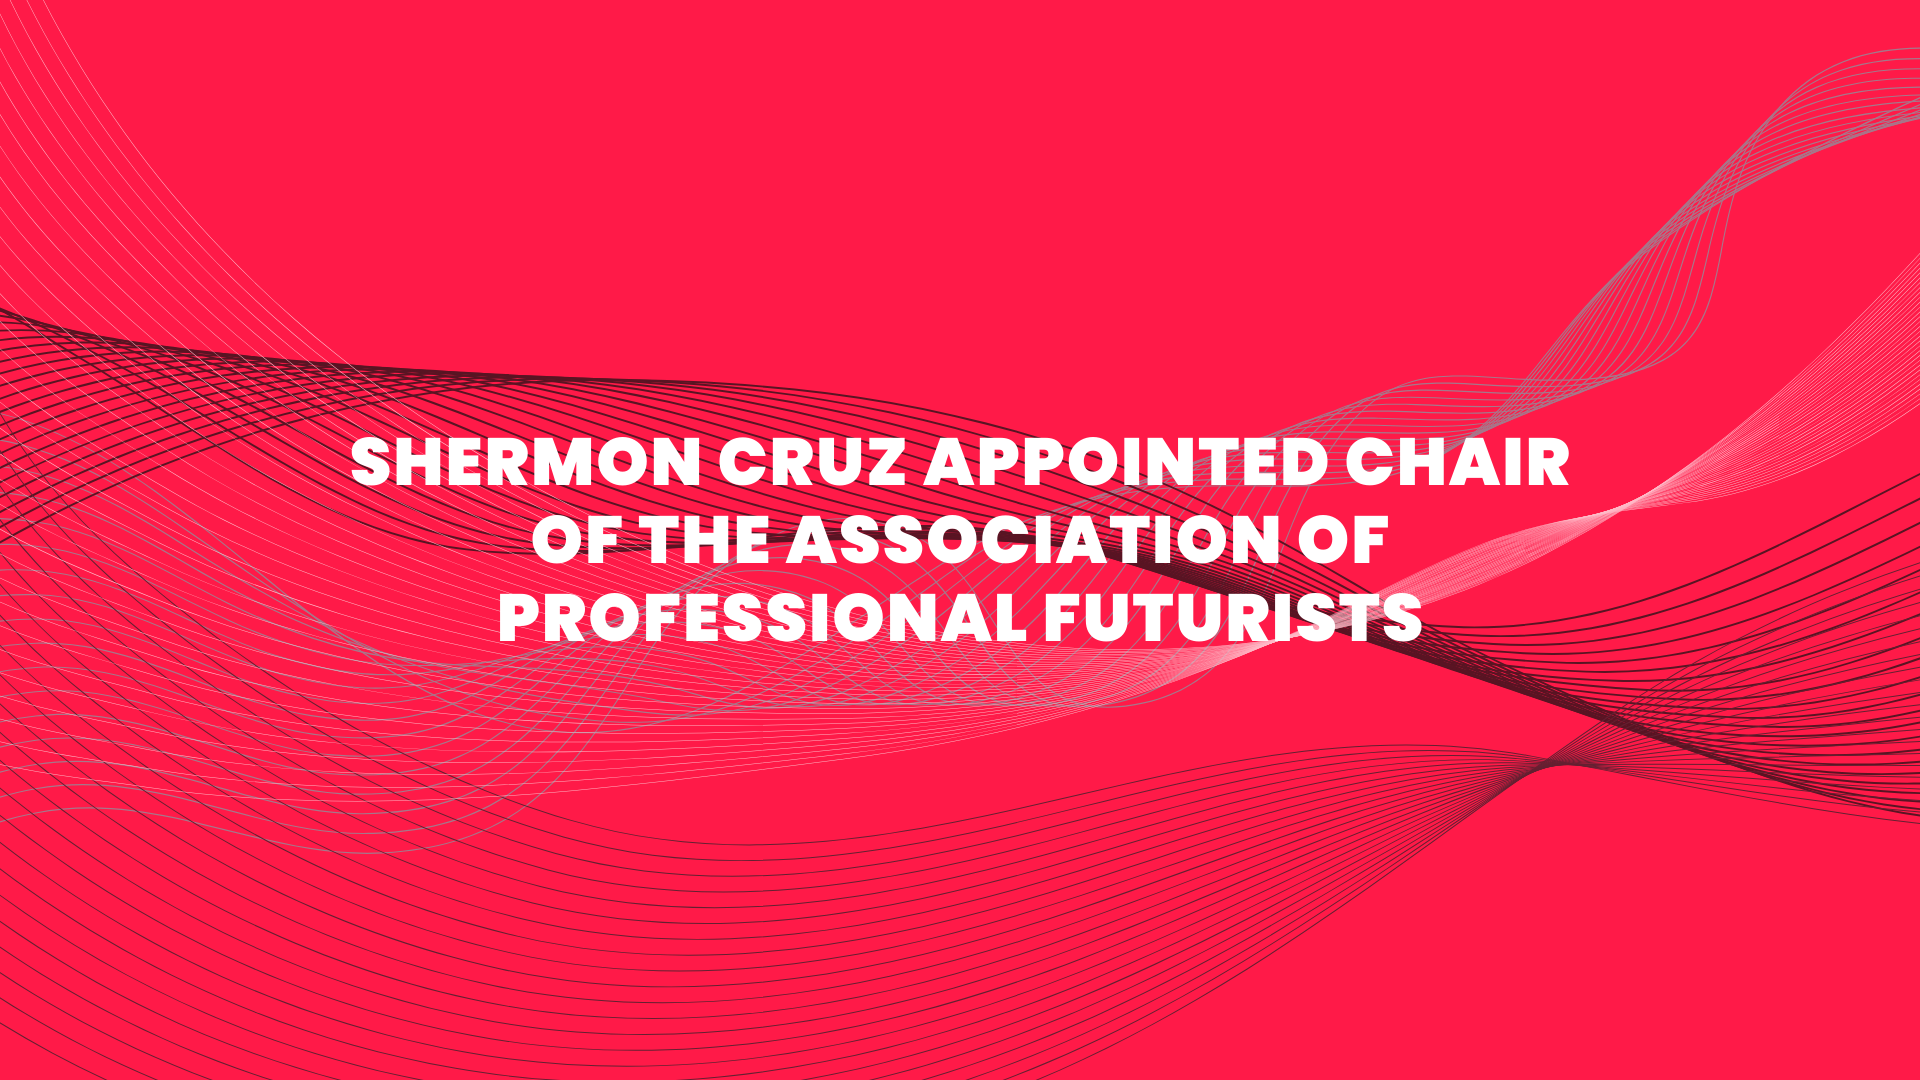 Shermon Cruz Appointed Chair of the Association of Professional Futurists